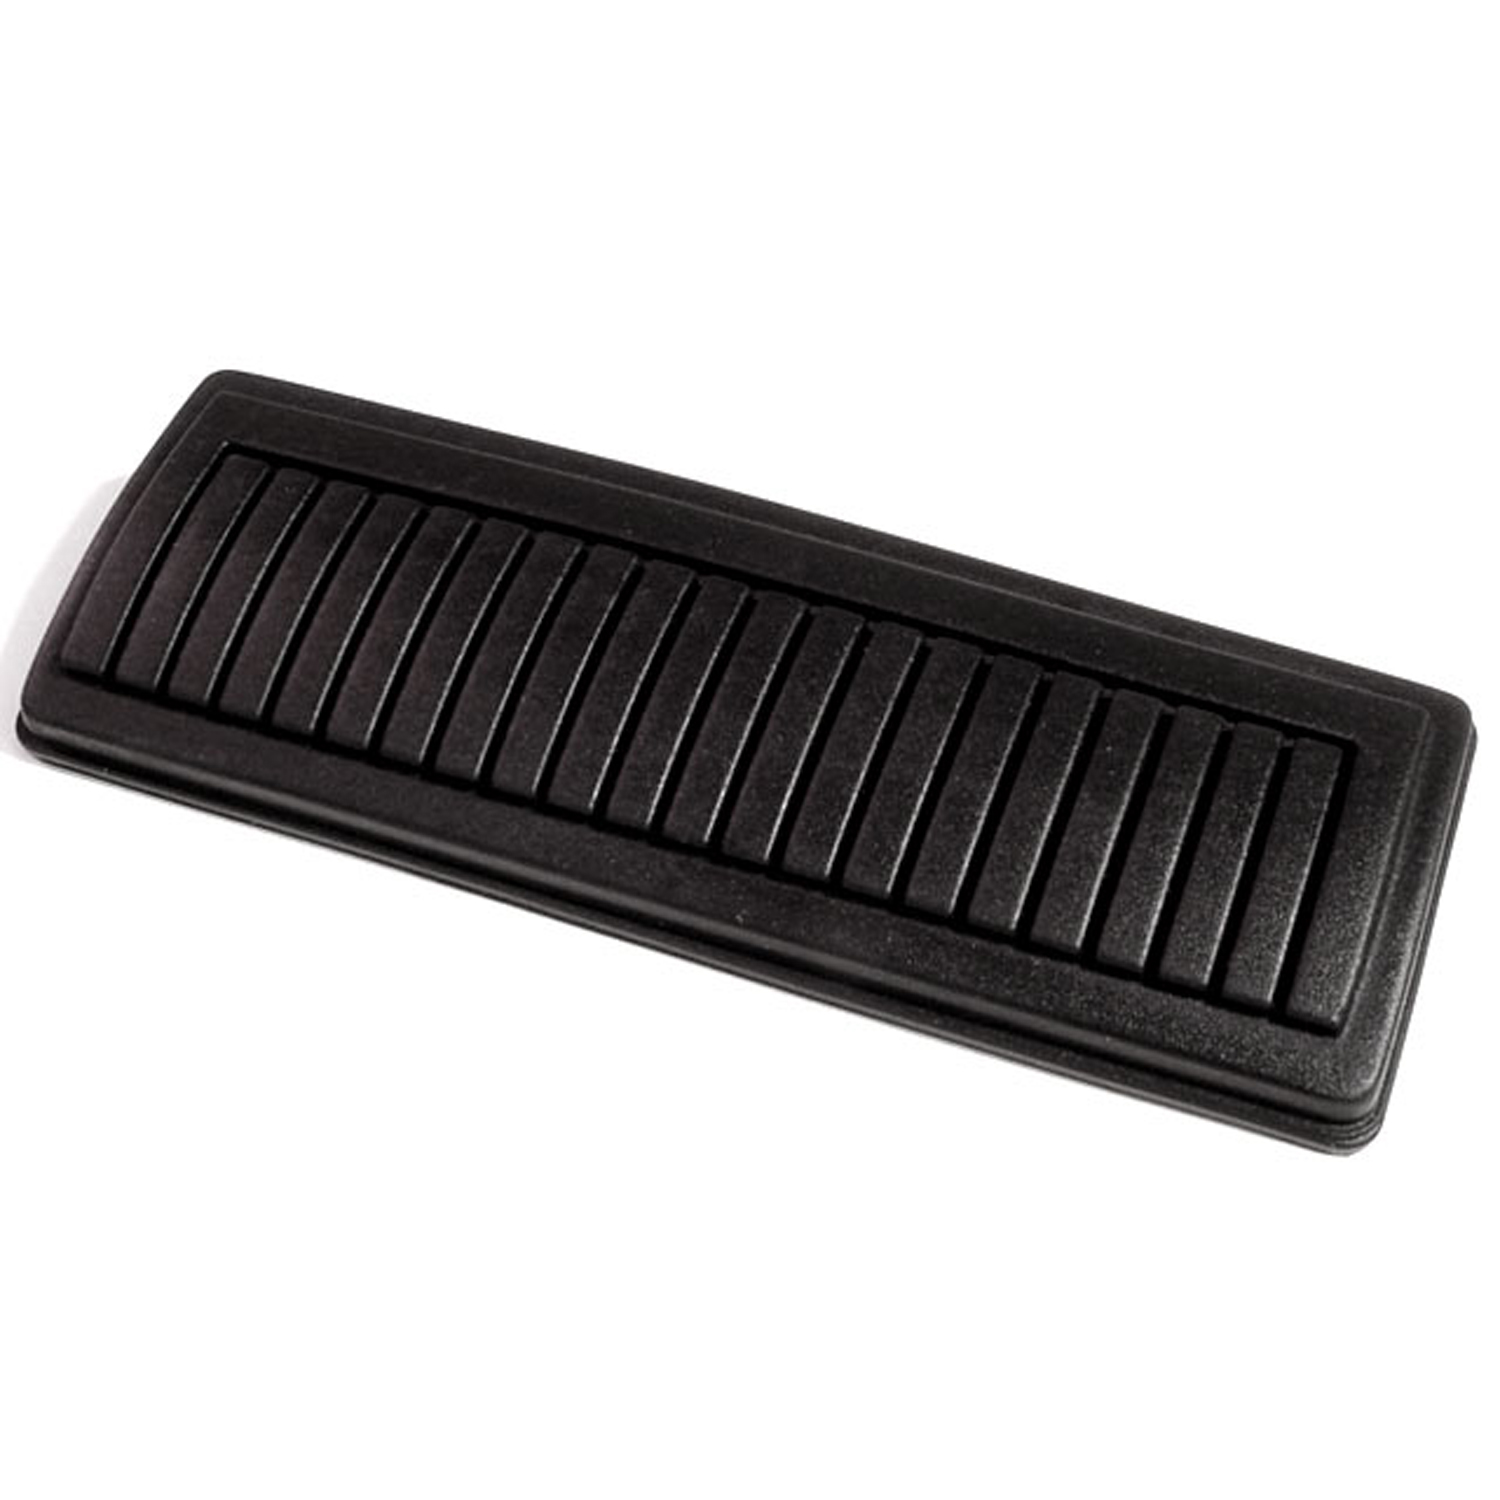 1969 Dodge Coronet Brake Pedal Pad, for models with automatic transmission-CB 200